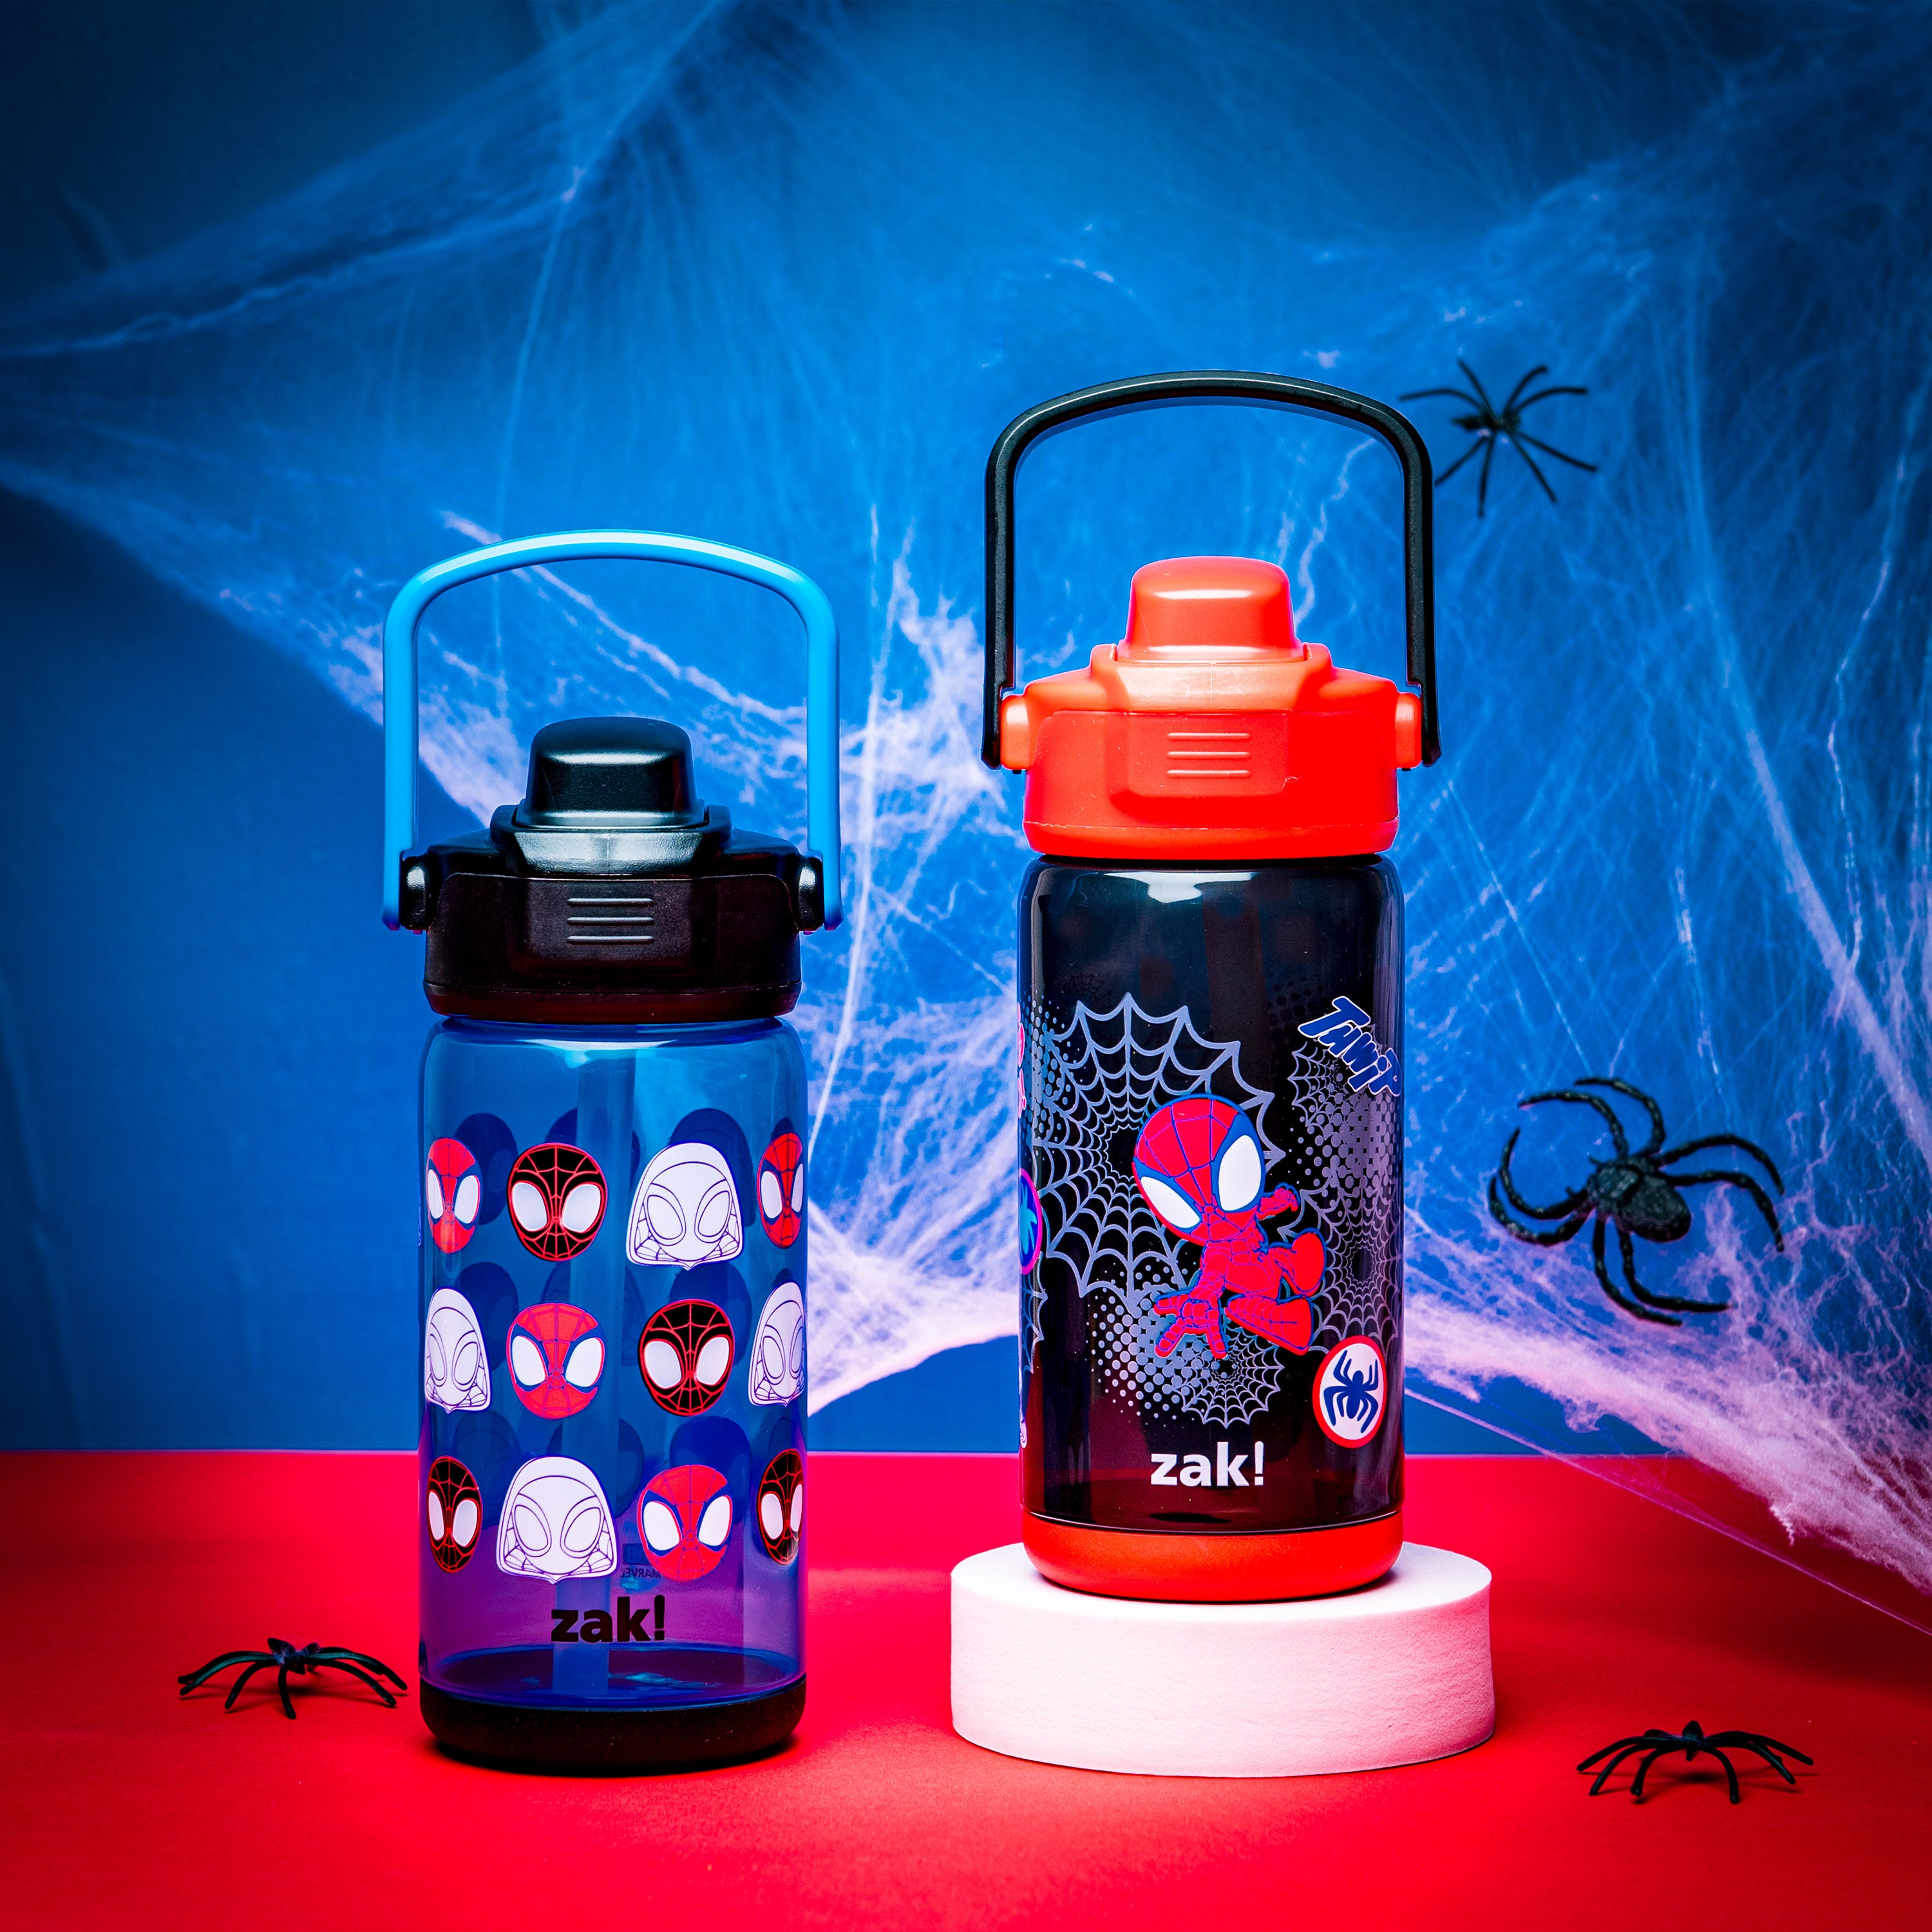 Get Ready for Your Next Adventure with Zak! Beacon Bottles and